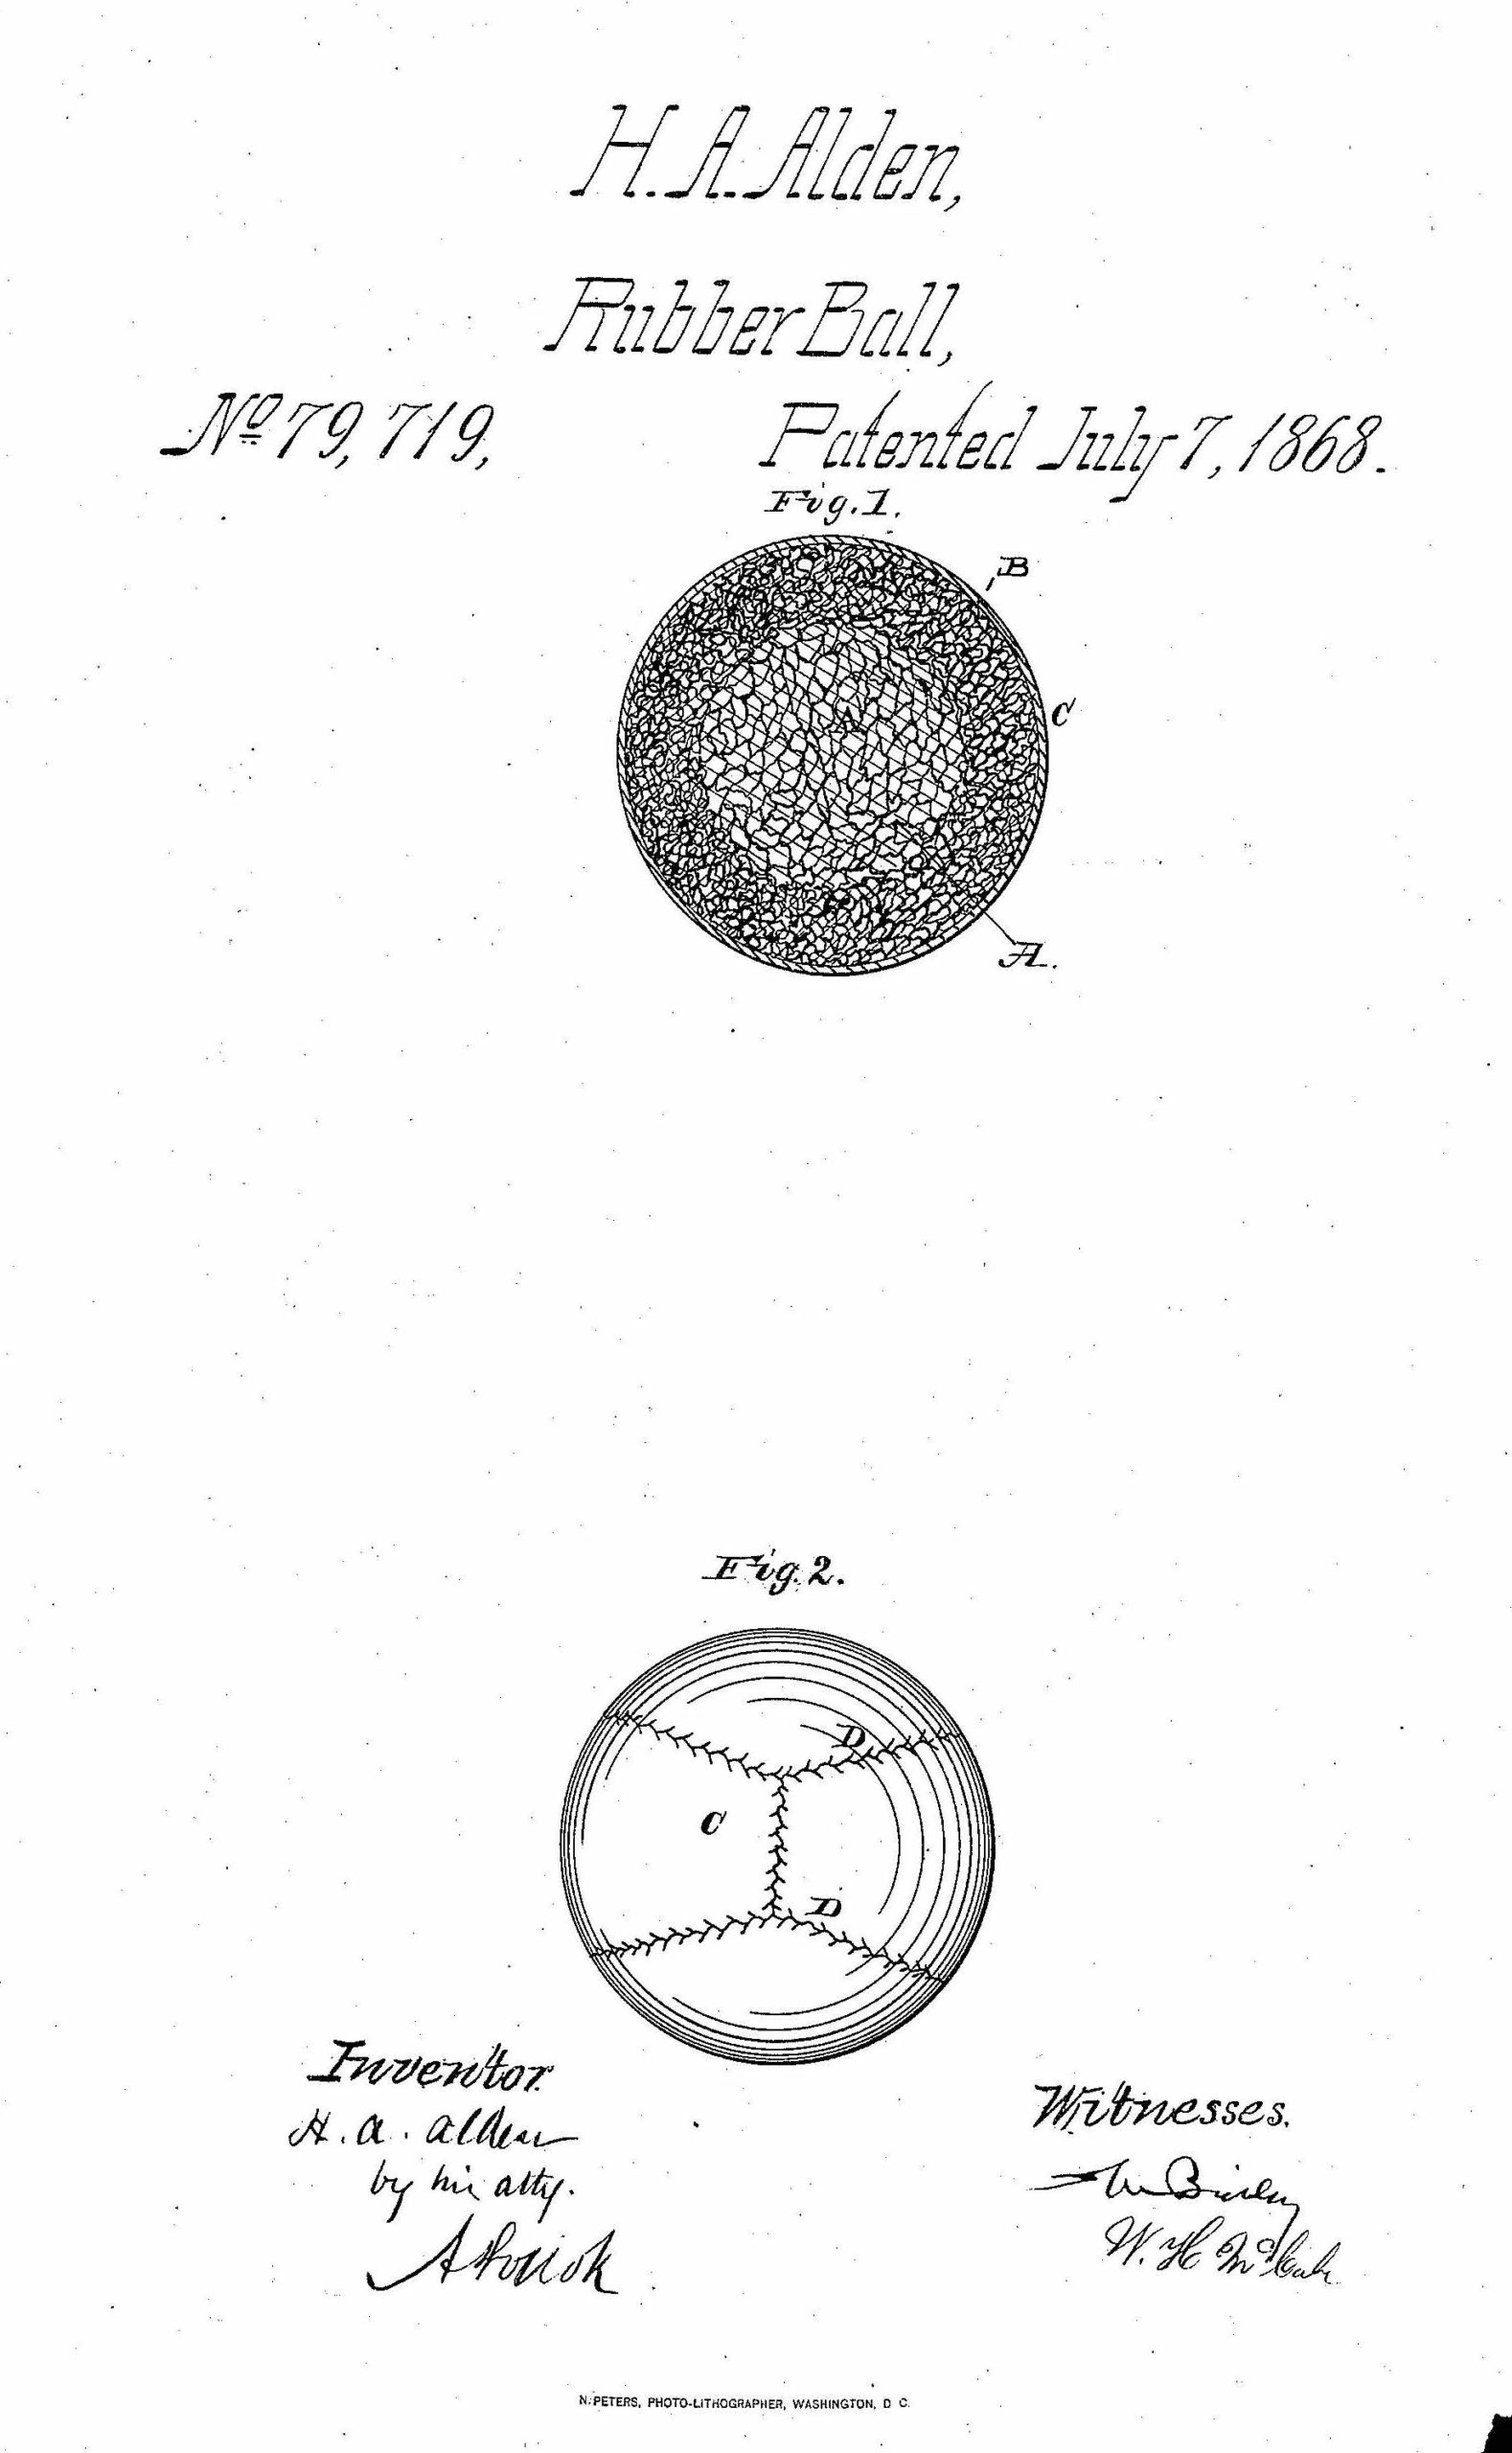 A picture of a baseball patent from 1868 for a rubber ball filed by H.A. Alden.